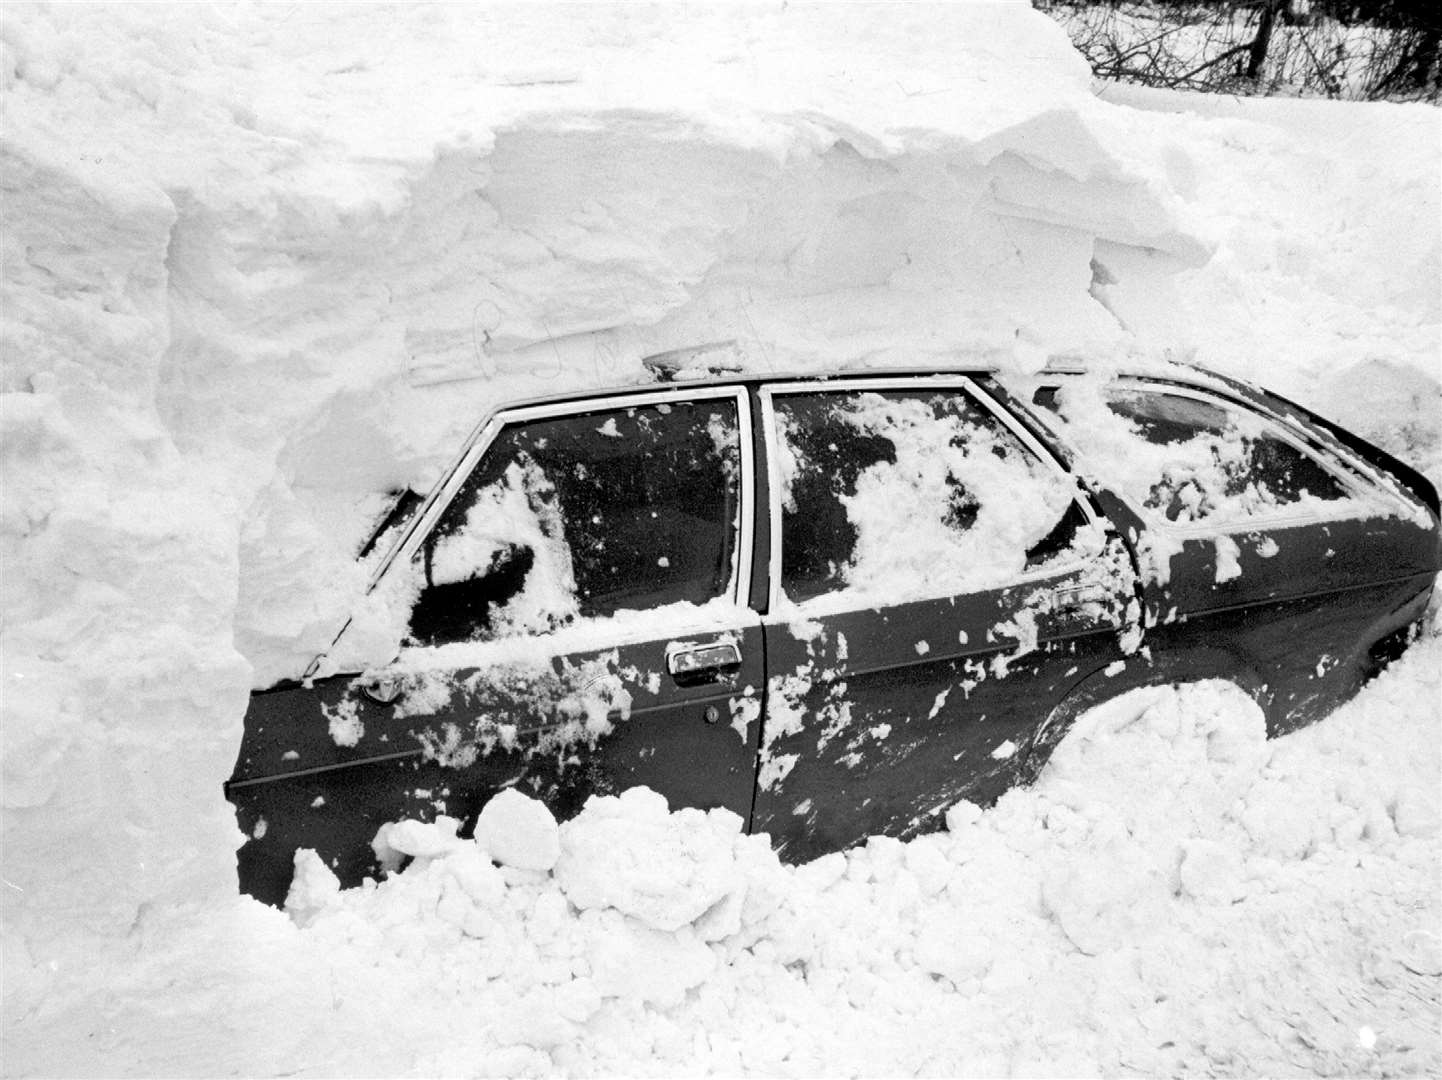 Cars were buried under a mass of snow